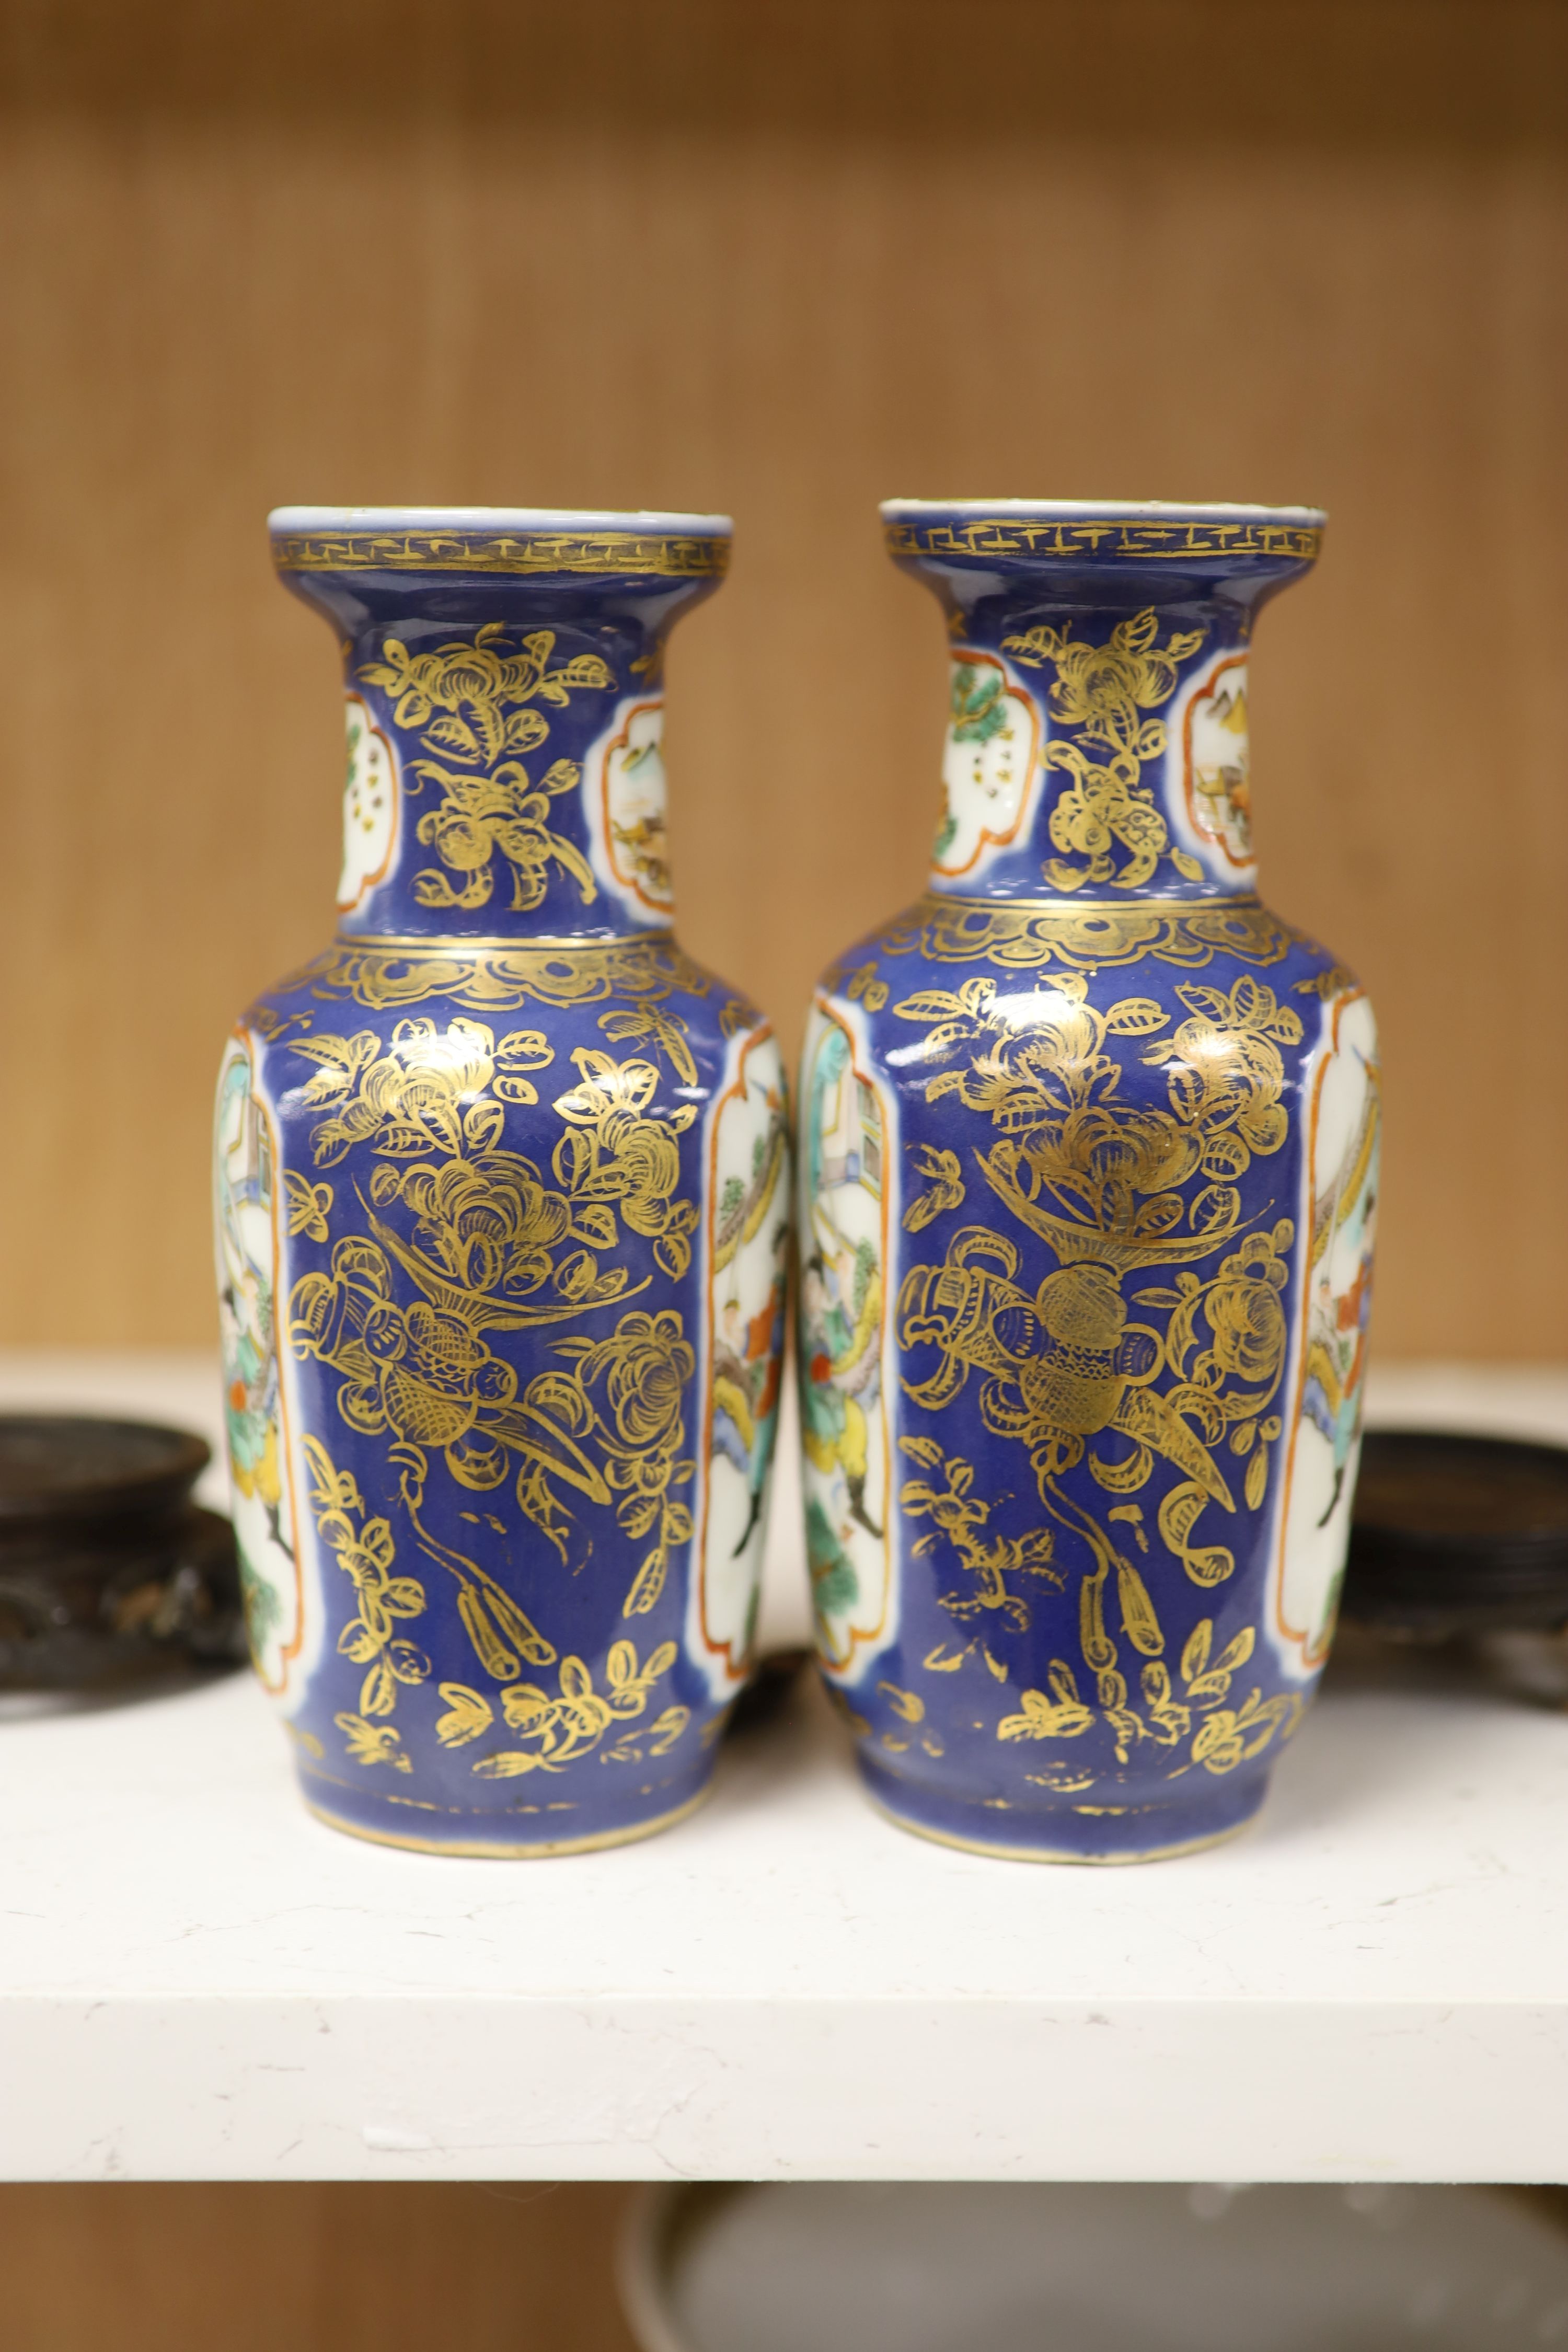 A pair of Chinese Kangxi style blue-ground vases, late 19th century decorated with panels of warriors and heightened in gilt, on carved hardwood stands, height 18cm excluding stand